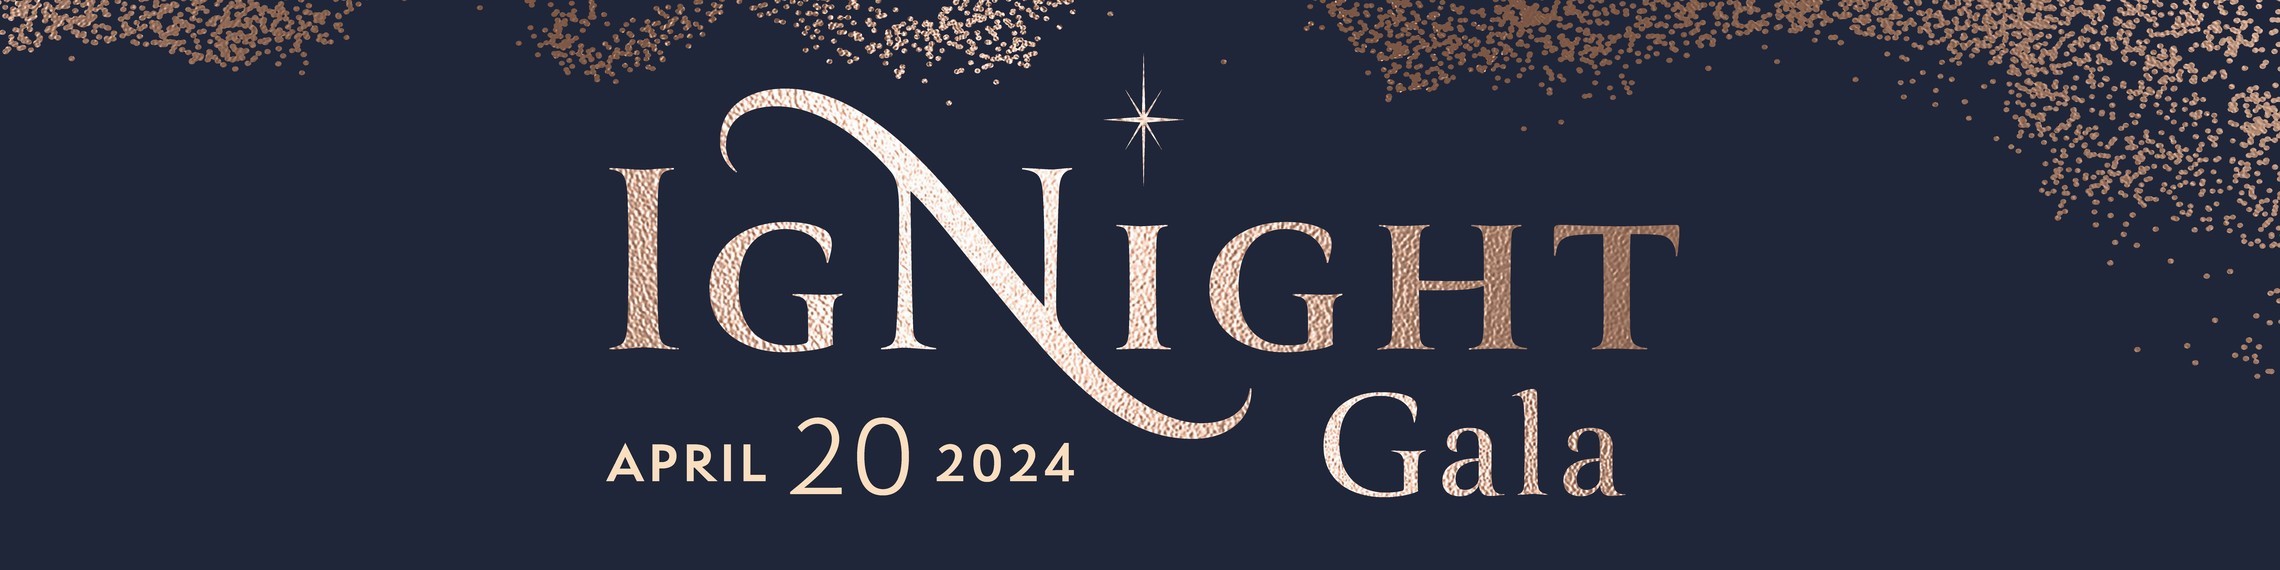 Ignight 2024 Banner Image Proof 2